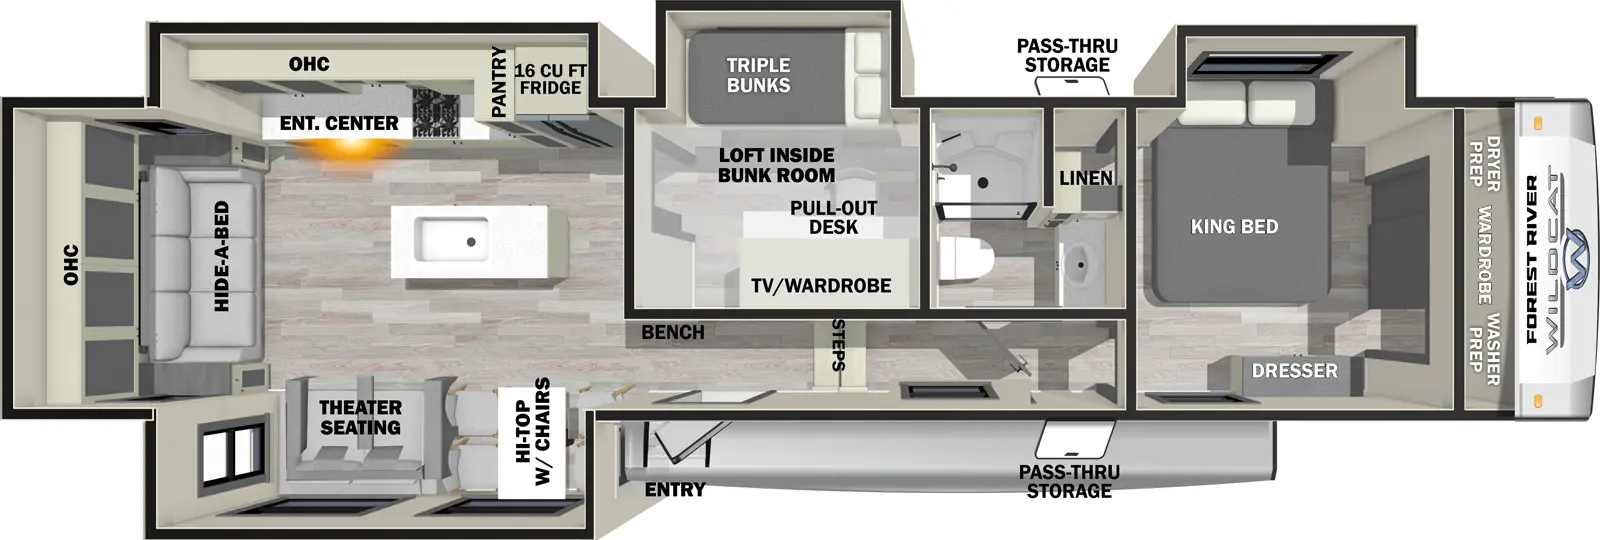 The 36MB has four slideouts and one entry. Exterior features a pass-through storage. Interior layout front to back: front wardrobe, off-door side king bed slideout, and closet with washer/dryer prep; off-door side full bathroom; steps down to entry and bench; mid room with triple bunk slideout, TV/wardrobe with pull-out desk, and a loft inside the bunk room; off-door side slideout with refrigerator, pantry, cooktop, overhead cabinet, and entertainment center with fireplace; kitchen island with sink; door side slideout with hi-top with chairs, and theater seating; rear hide-a-bed sofa with overhead cabinet.